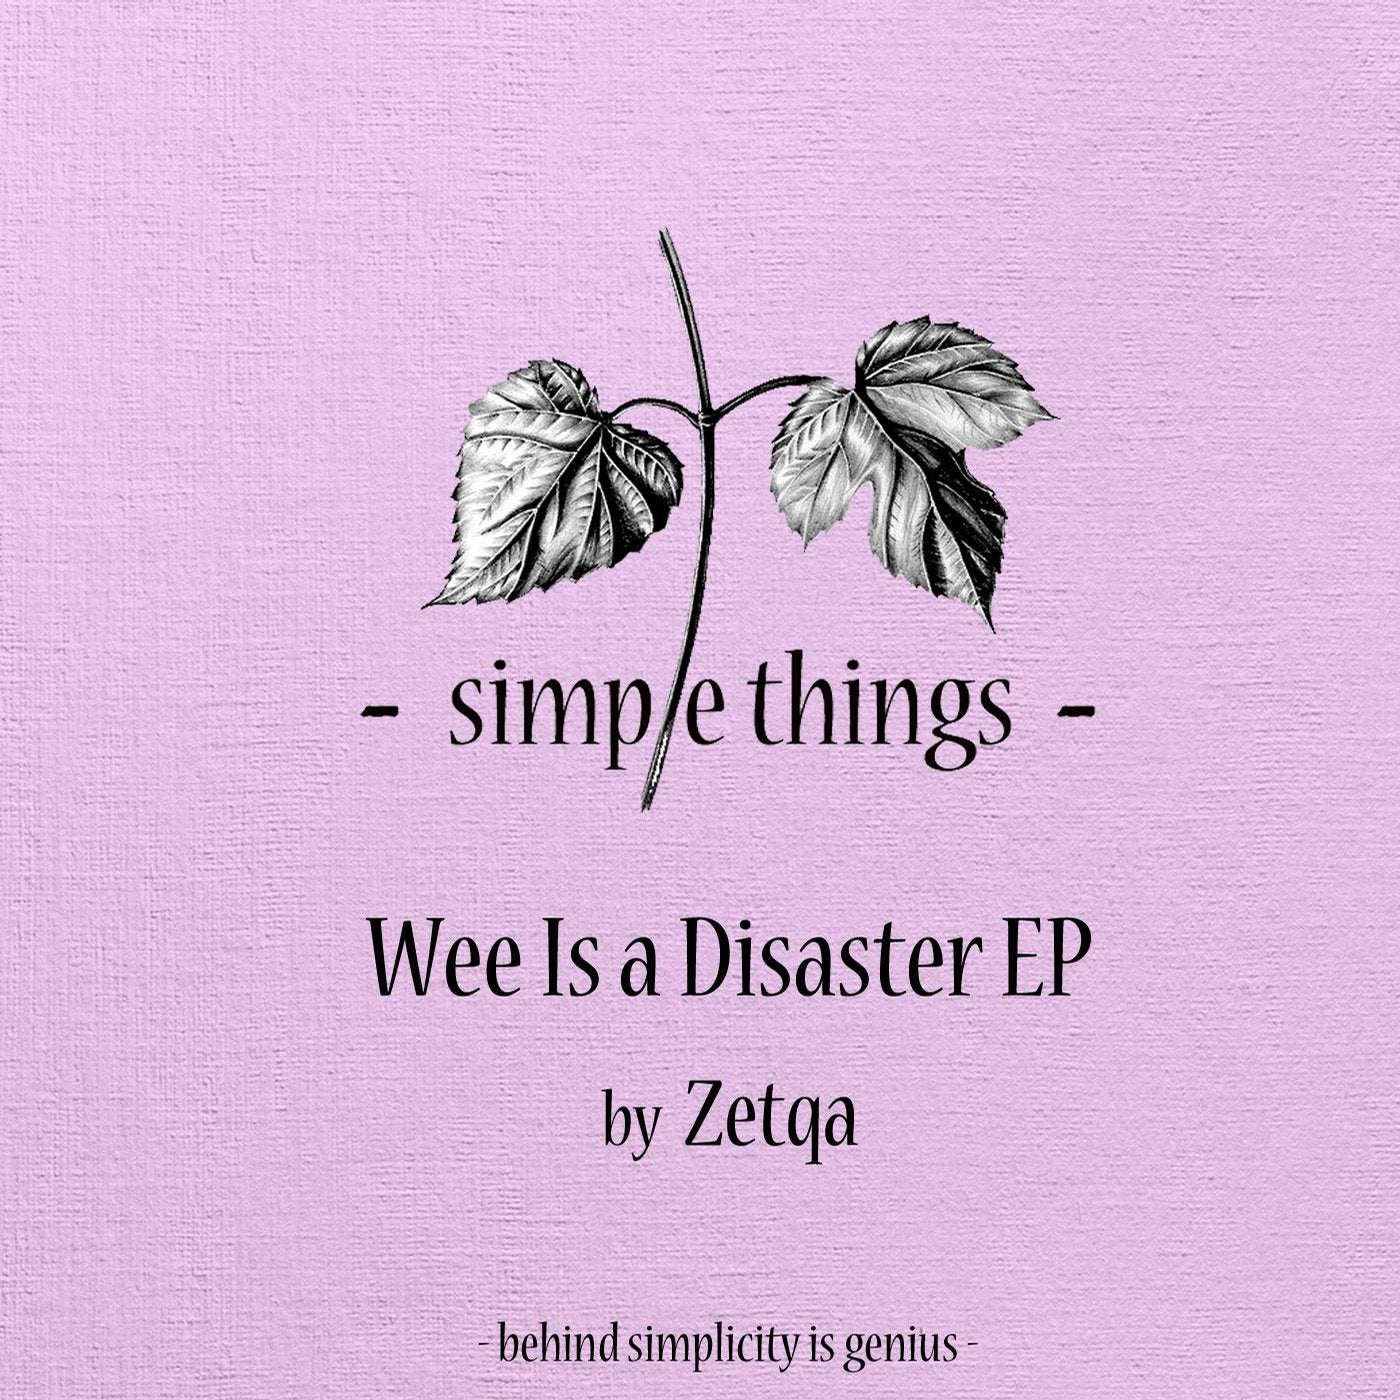 Zetqa - Wee Is a Disaster EP